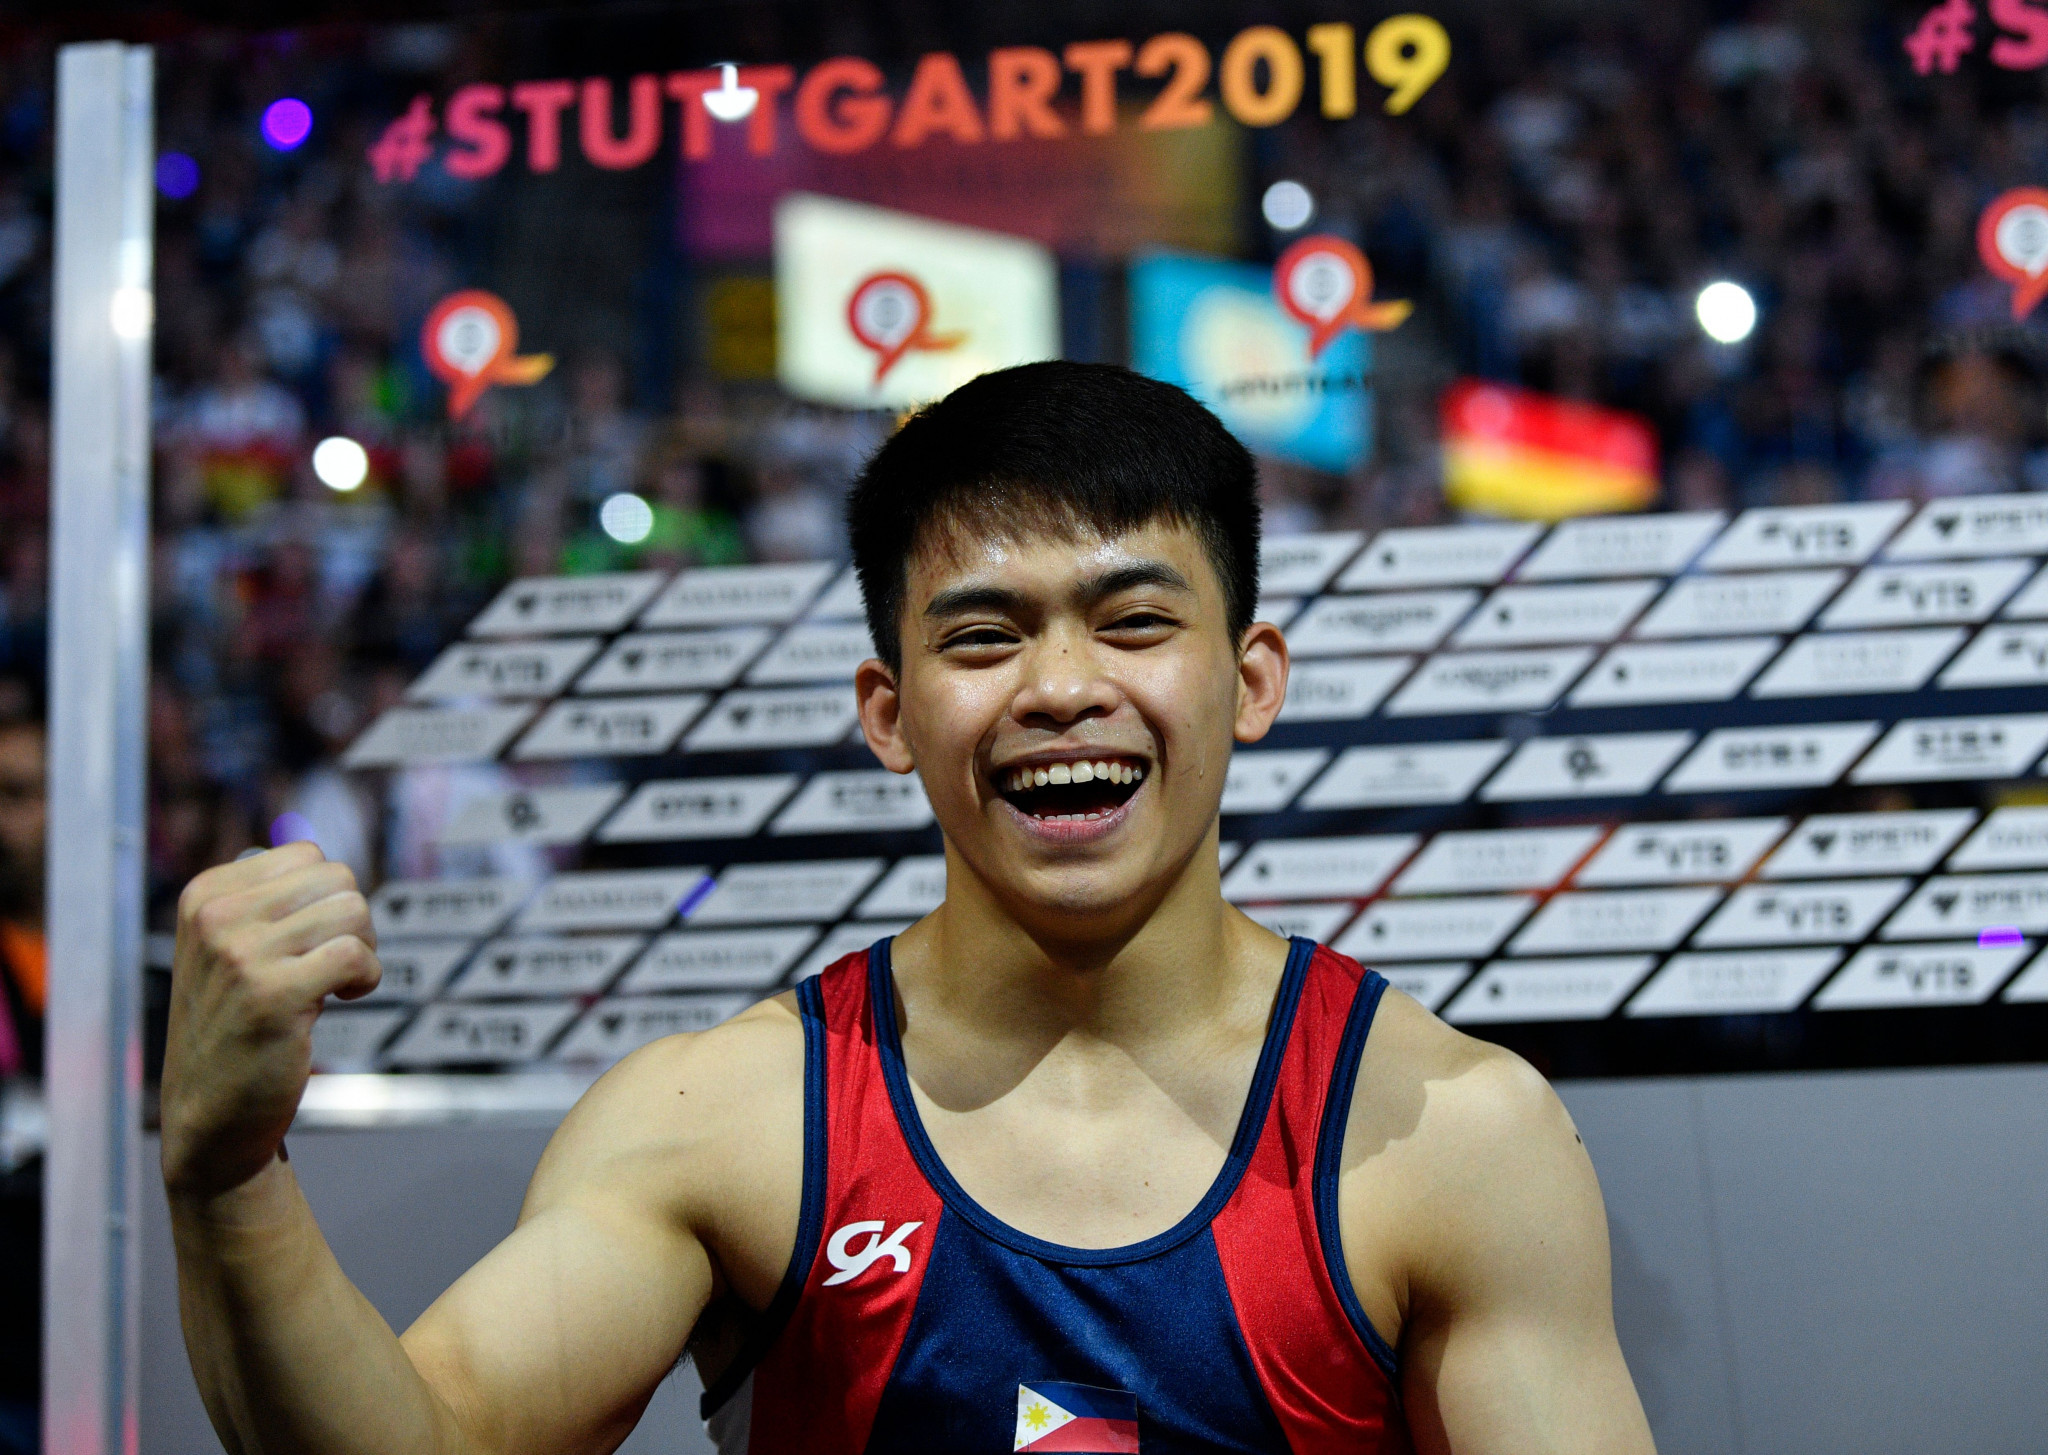 Carlos Yulo became the first Filipino to earn a title at the World Gymnastics Championships after winning the floor event last year ©Getty Images